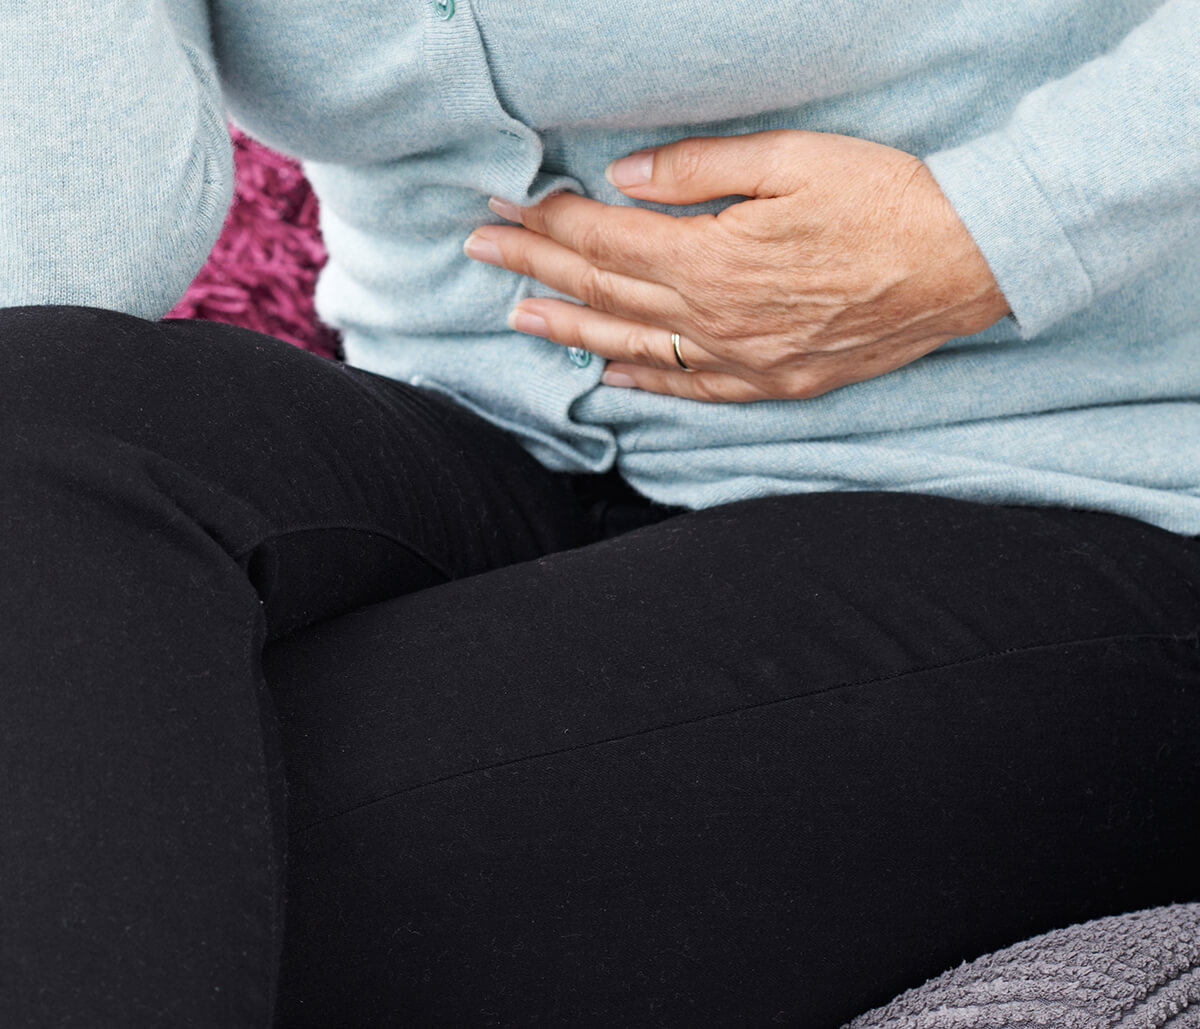 The Irritable Bowel Syndrome (IBS), skin connection and why it matters for your treatment